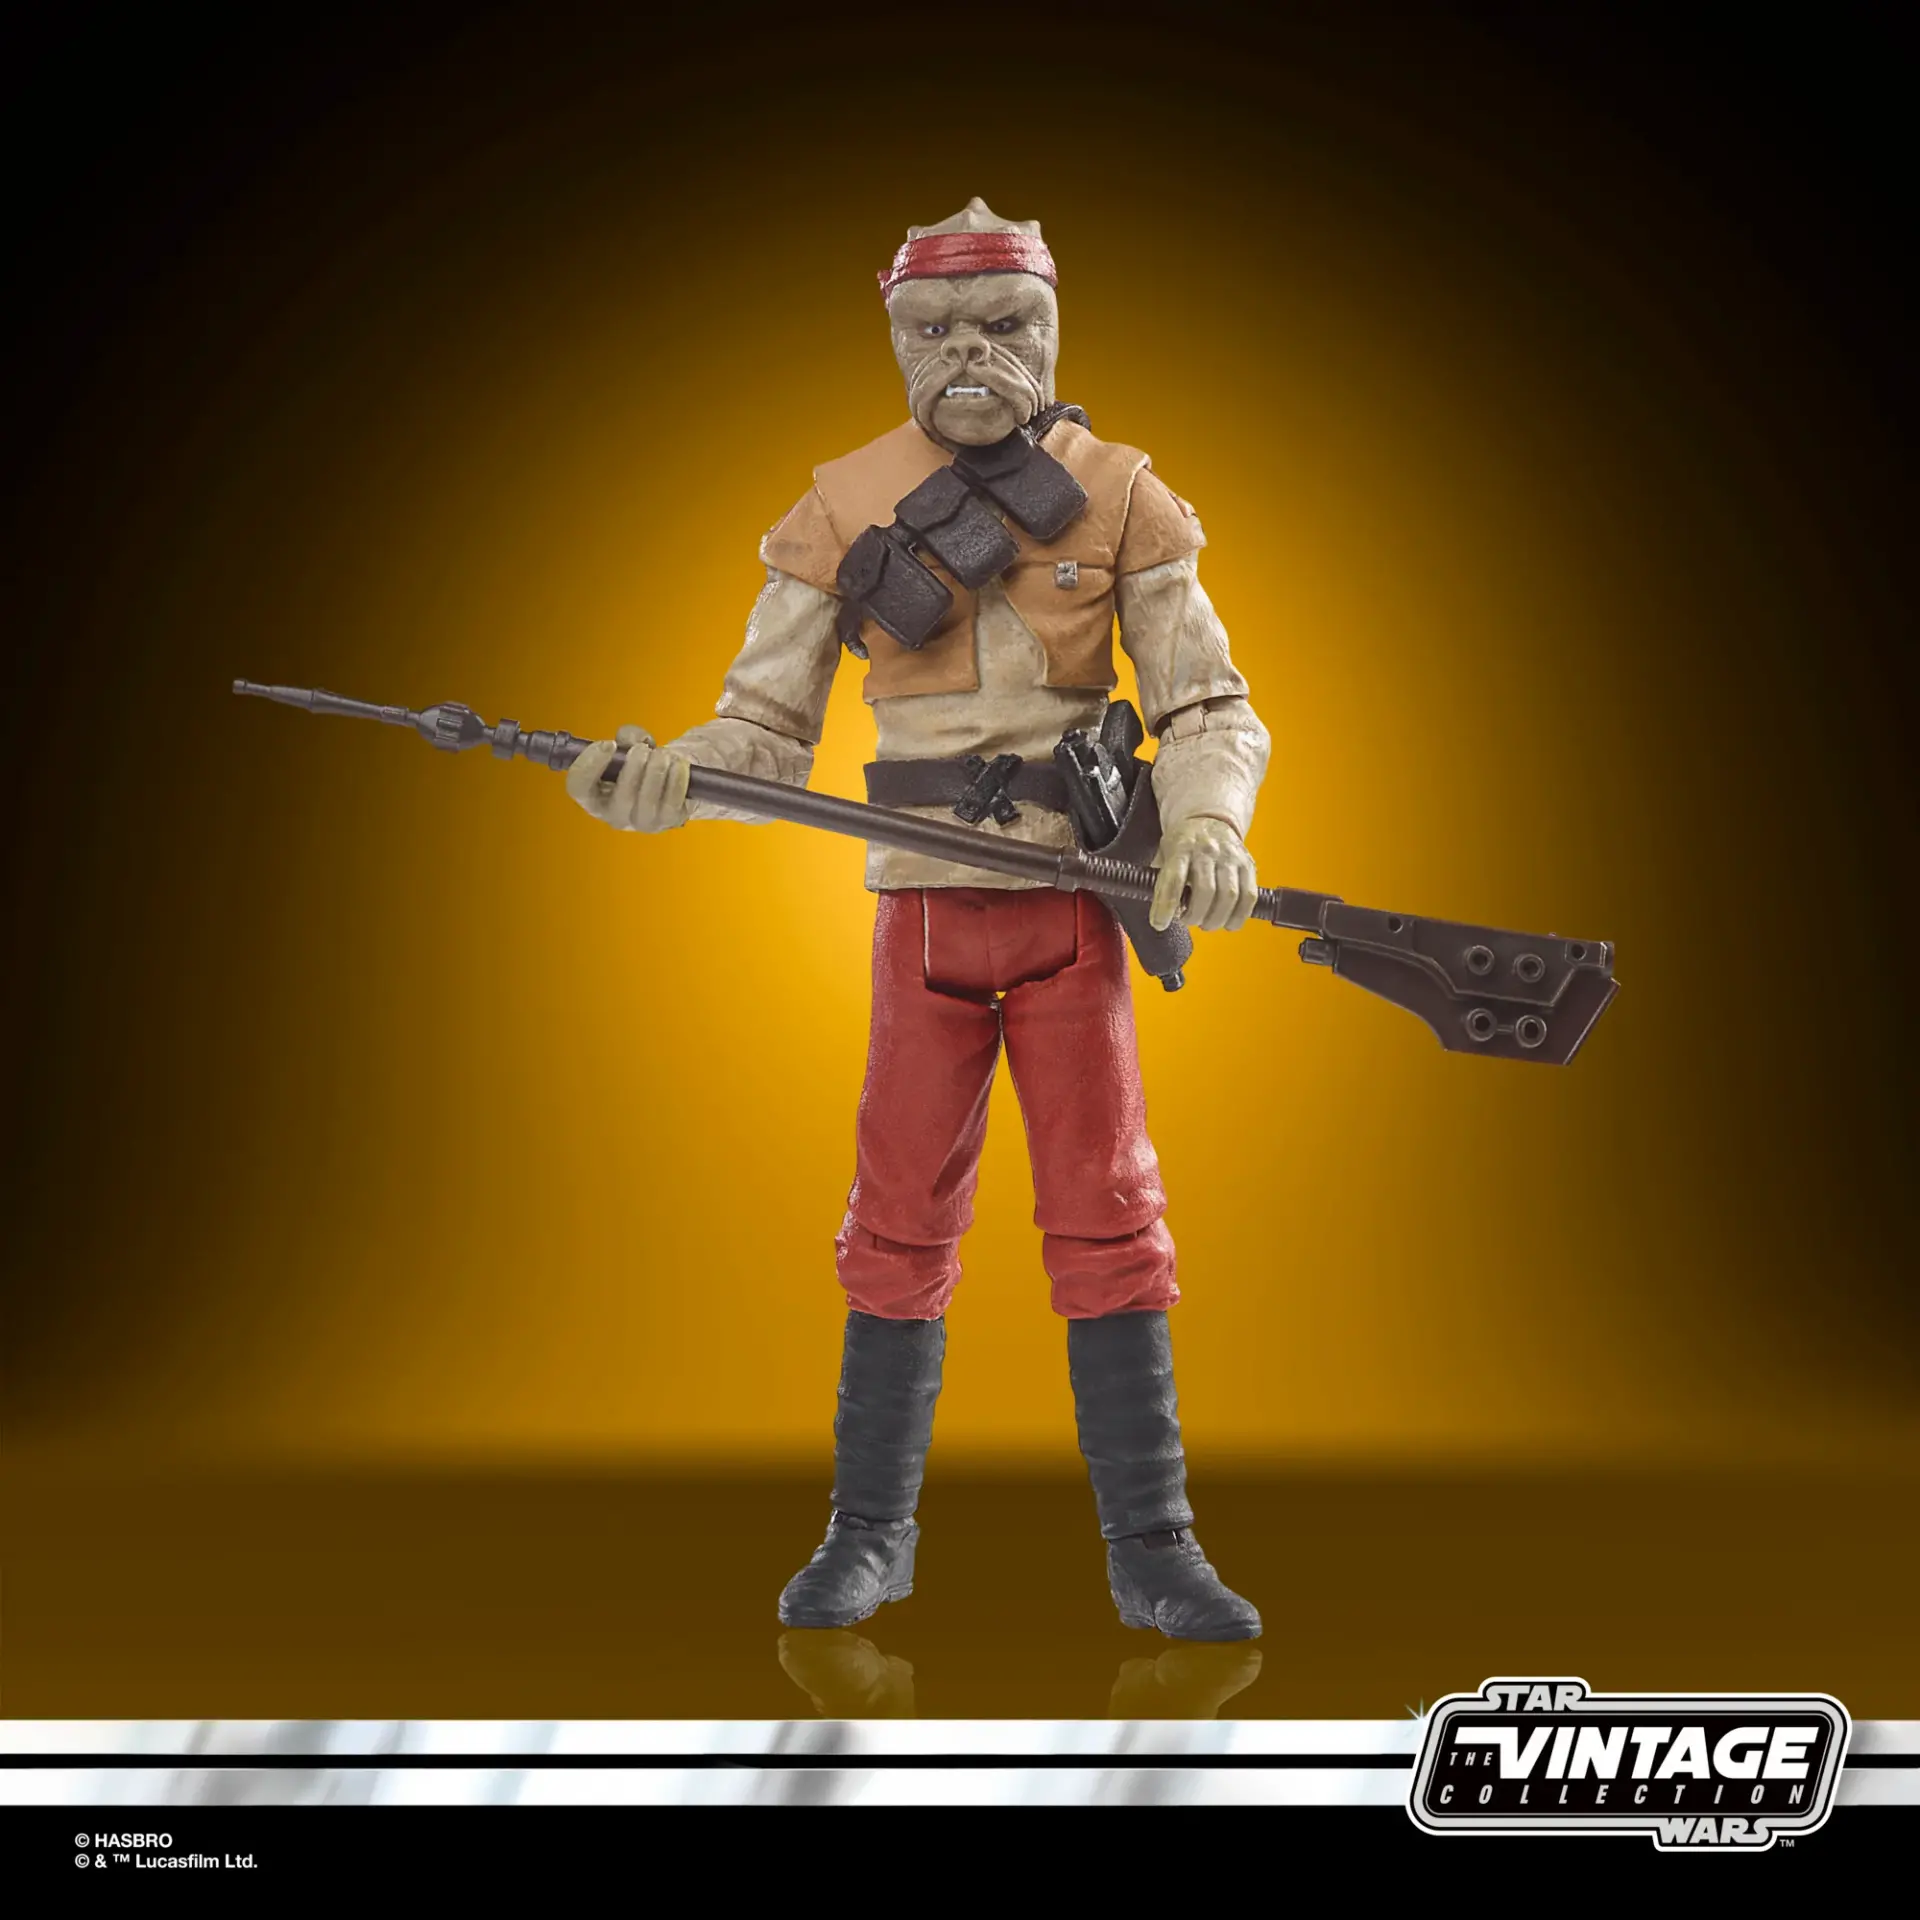 Star wars the vintage collection kithaba skiff guard jawascave 6